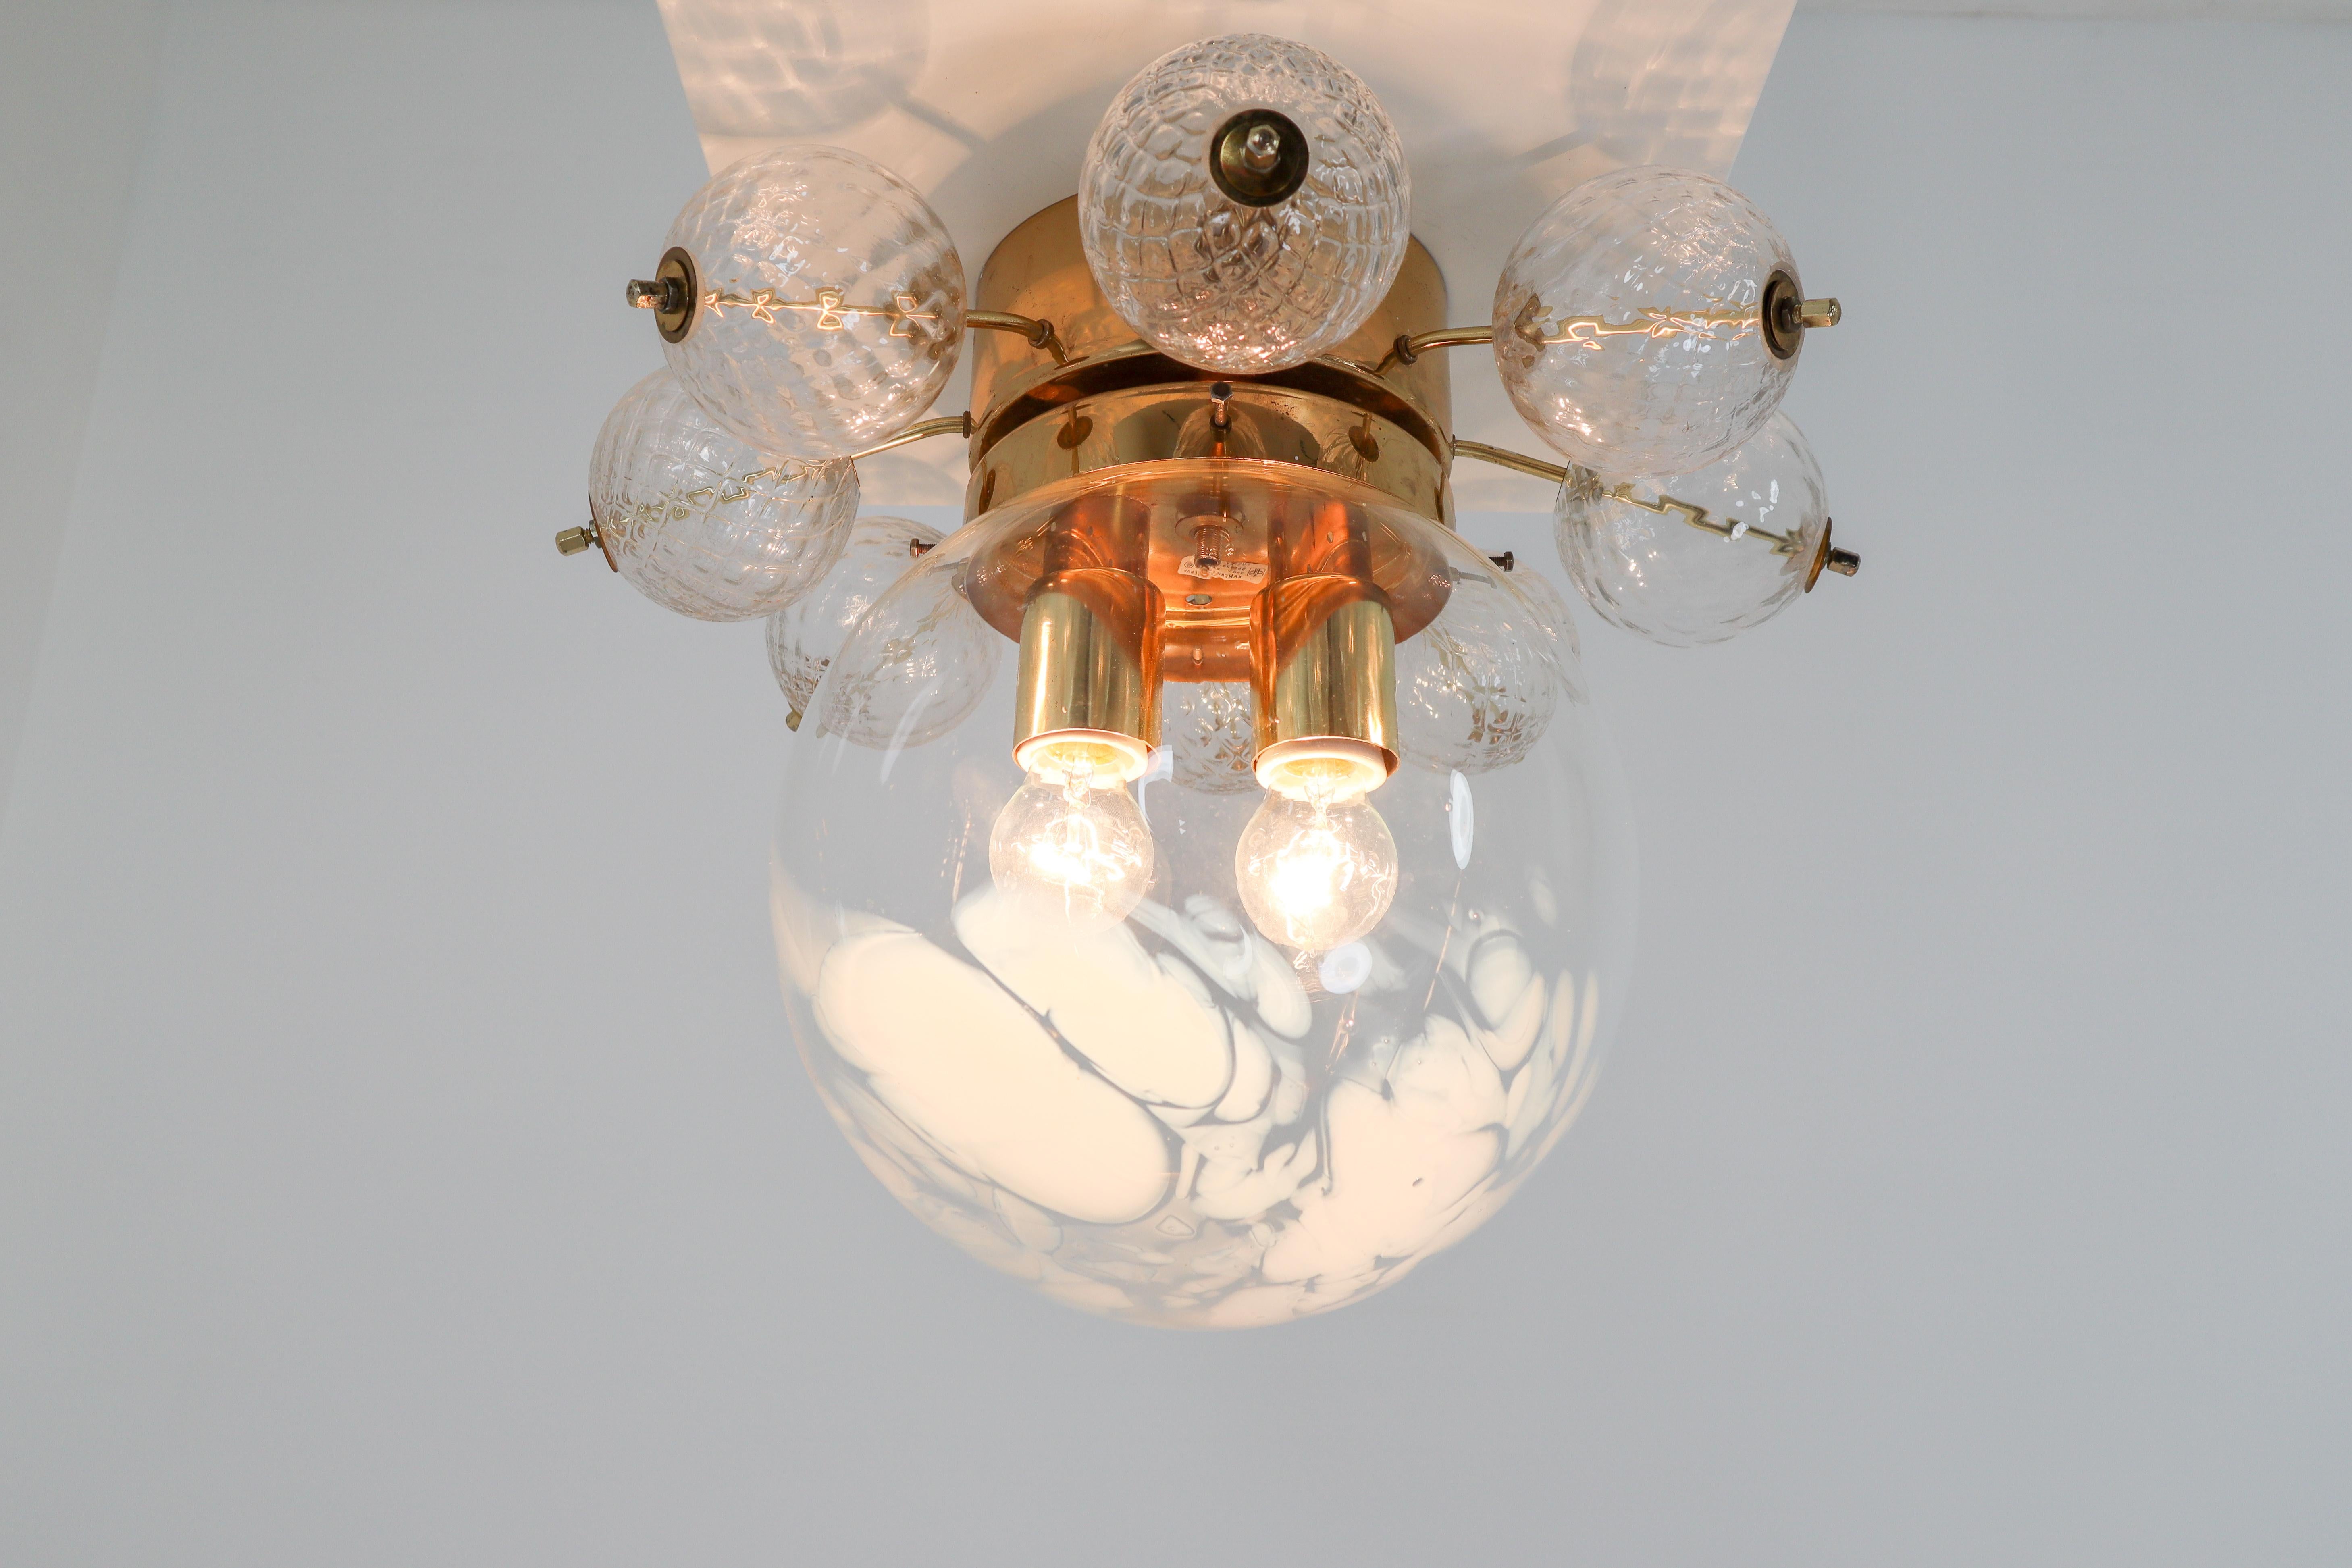 Large Midcentury Brass Ceiling Lamp-Chandelier with Hand Blown Art-Glass, 1960s For Sale 3